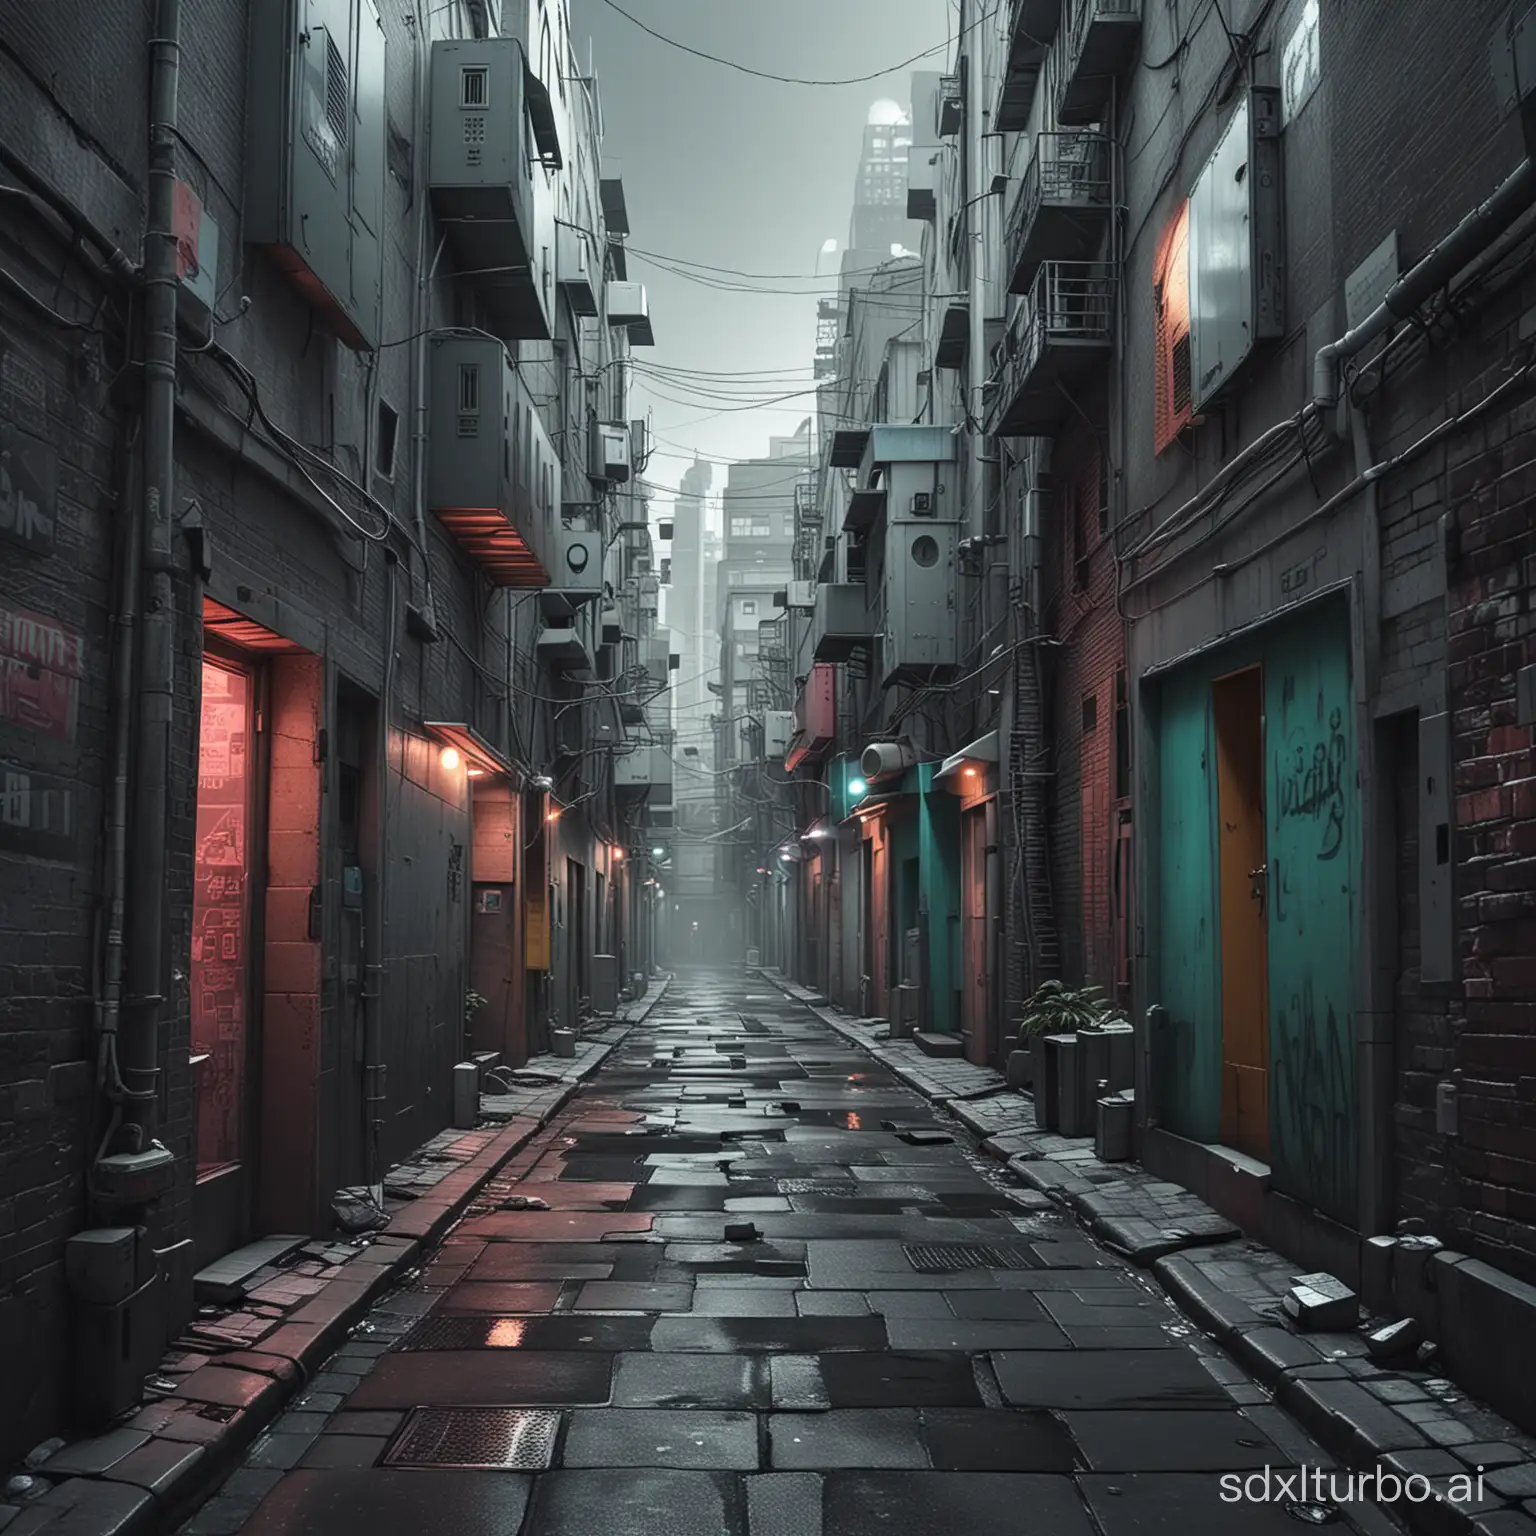 Surreal-Retro-Alley-Transformed-by-CyberStyle-Architecture-in-Vivid-Contrast